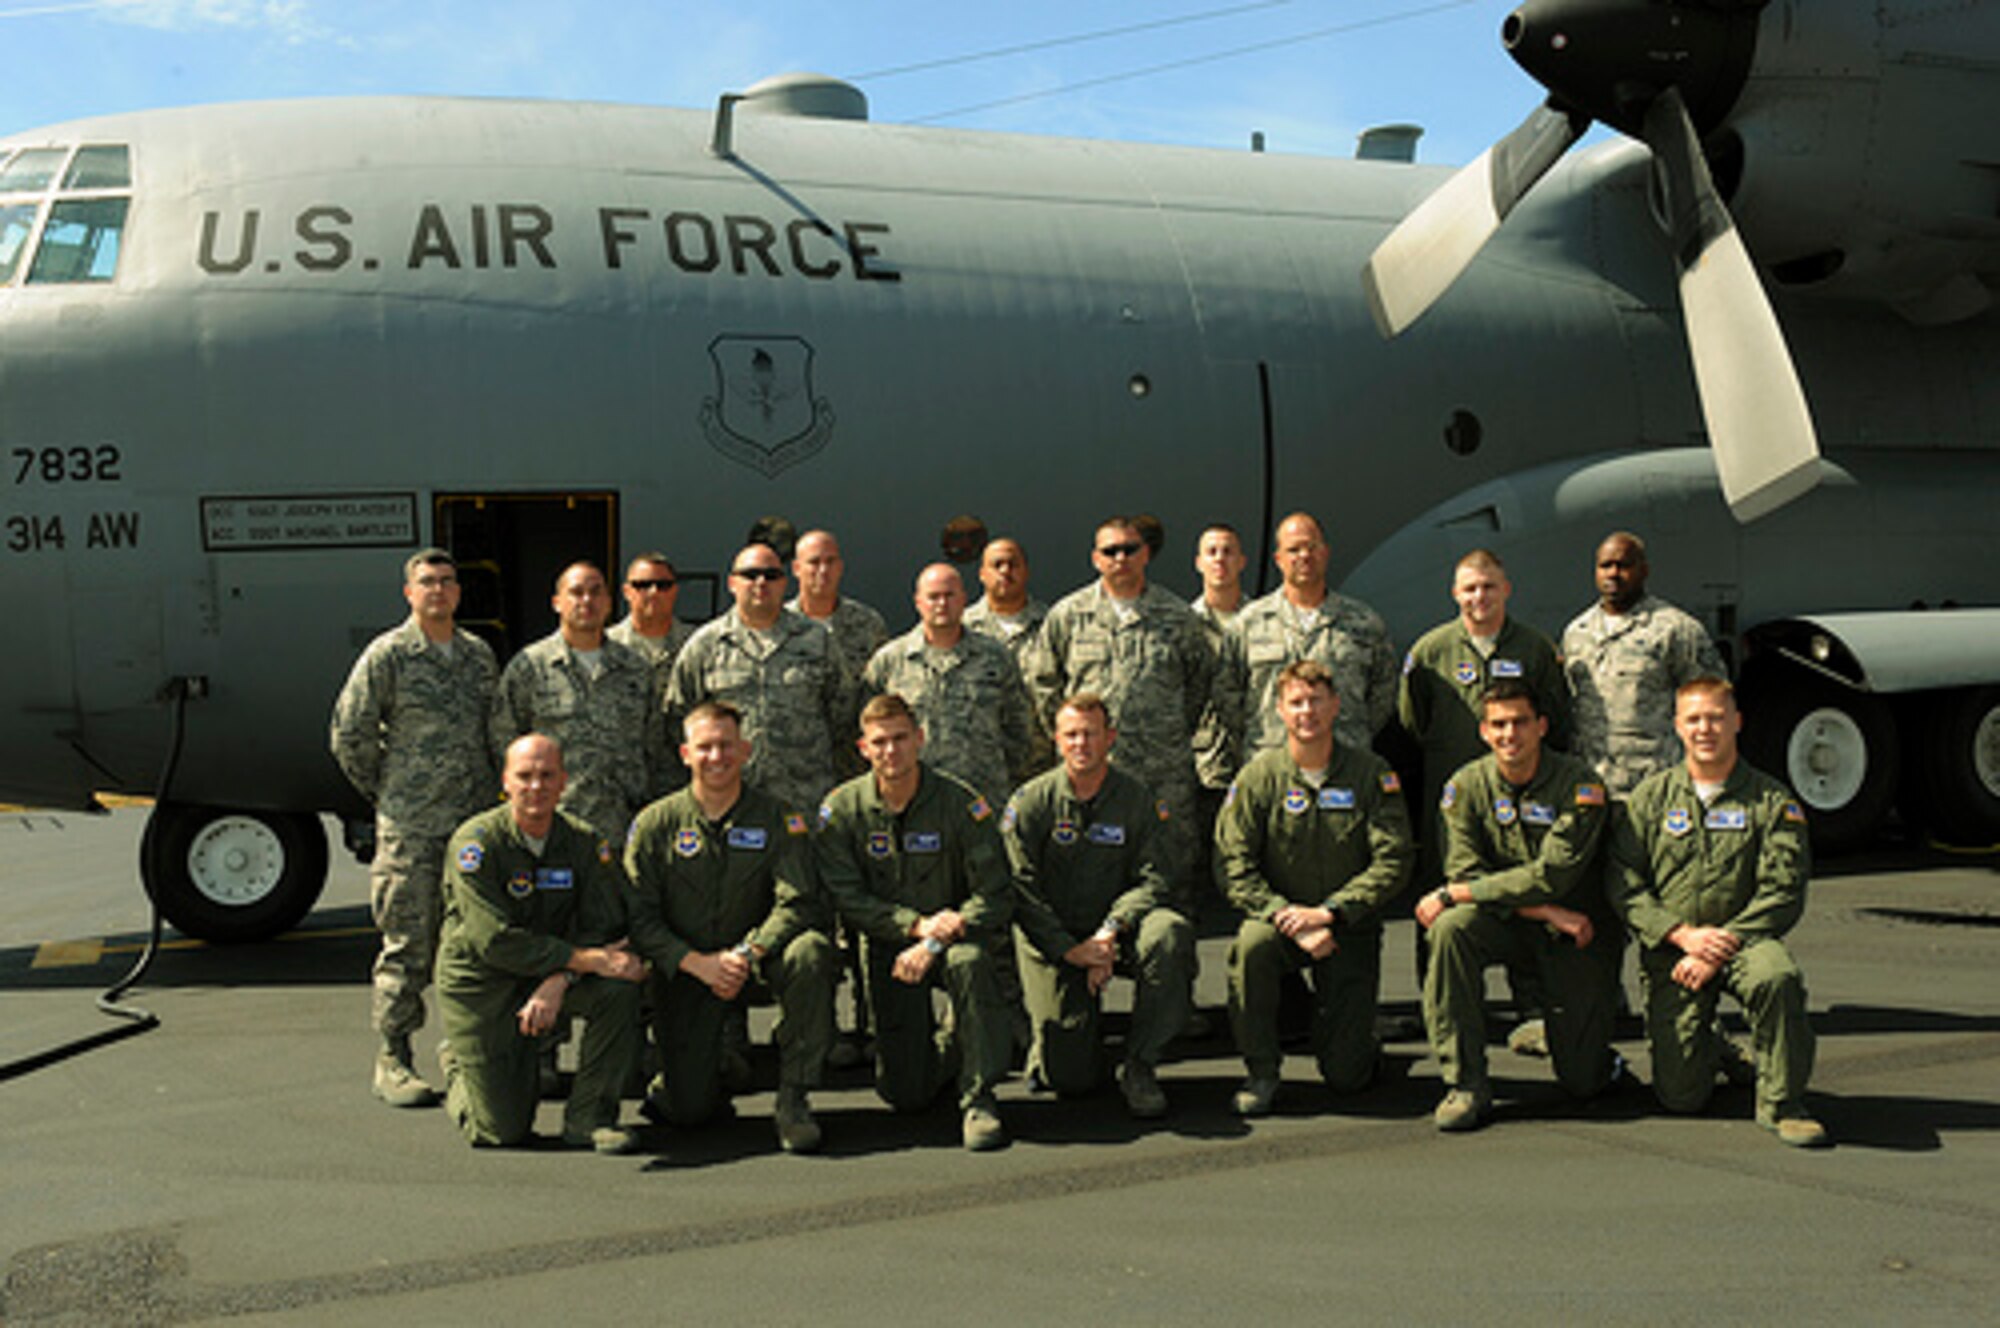 Members of the 19th Airlift Wing, Little Rock Air Force Base, Ark., gather
for group photo after arriving at McChord Air Force Base, Wash., for Air
Mobility RODEO 2009, July 18. RODEO is an international combat skills and
flying operations competition designed to develop and improve techniques and
procedures with our international partners to enhance mobility operations.
(U.S. Air Force photo by Staff Sgt. Christine Jones)